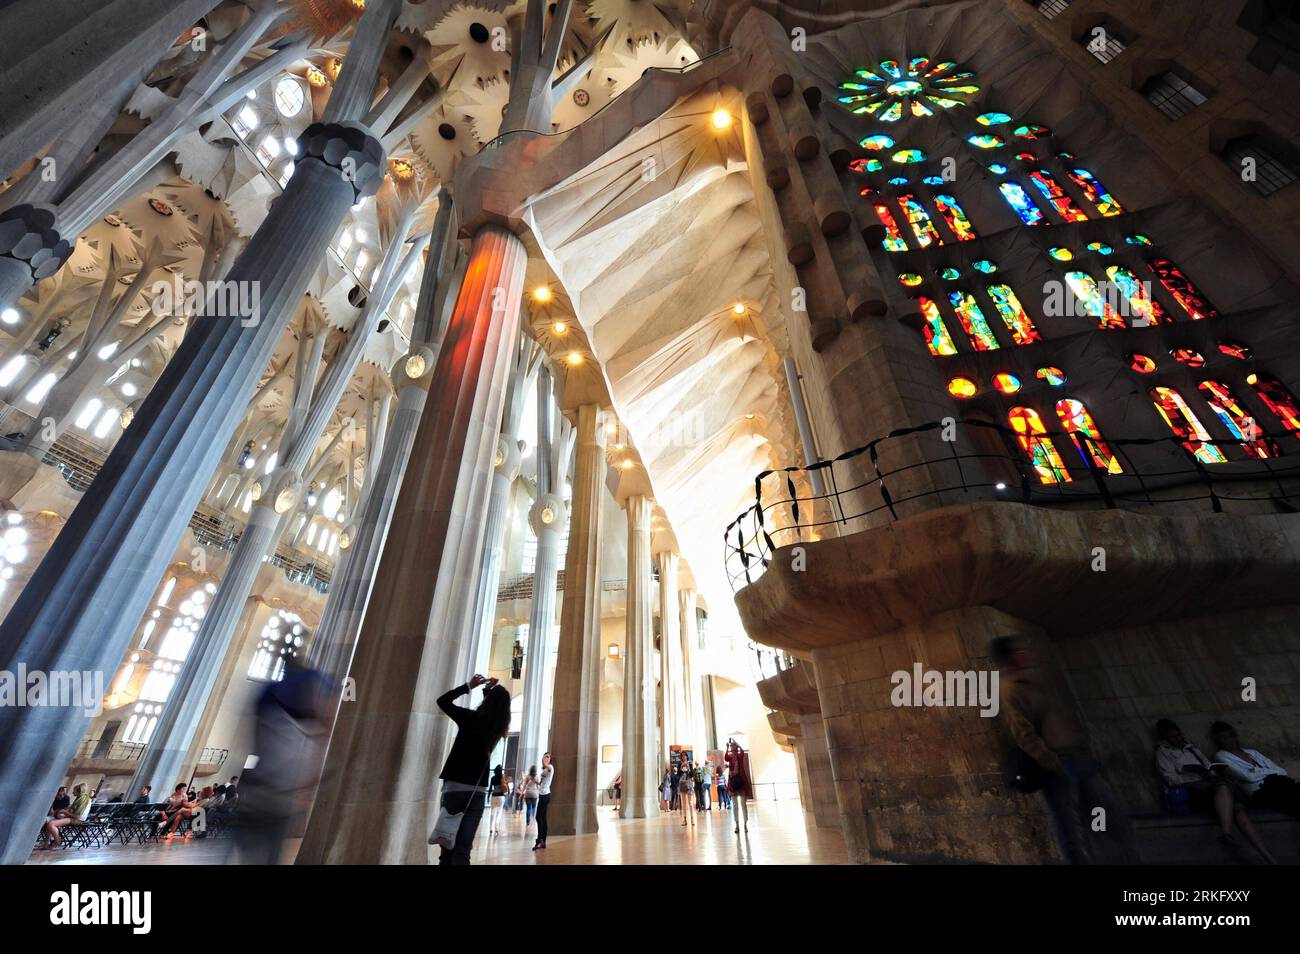 Bildnummer: 55470574  Datum: 18.05.2011  Copyright: imago/Xinhua (110617) --  , June 17, 2011 (Xinhua) -- Photo taken on May 18, 2011 shows visitors in the Sagrada Familia, major work of Catalan architect Gaudi, in Bacelona. The famous unfinished works of Antoni Gaudi is presently the only uncomplete building but on the list of UNESCO World Heritage.  (Xinhua/Chen Haitong)(srb) FRANCE-PARIS-UNESCO-WORLD HERITAGE COMMITTEE-35TH SESSION-BACKGROUND PUBLICATIONxNOTxINxCHN Reisen Highlight xub 2011 quer o0 Kirche Innen Spanien Gebäude    Bildnummer 55470574 Date 18 05 2011 Copyright Imago XINHUA  J Stockfoto